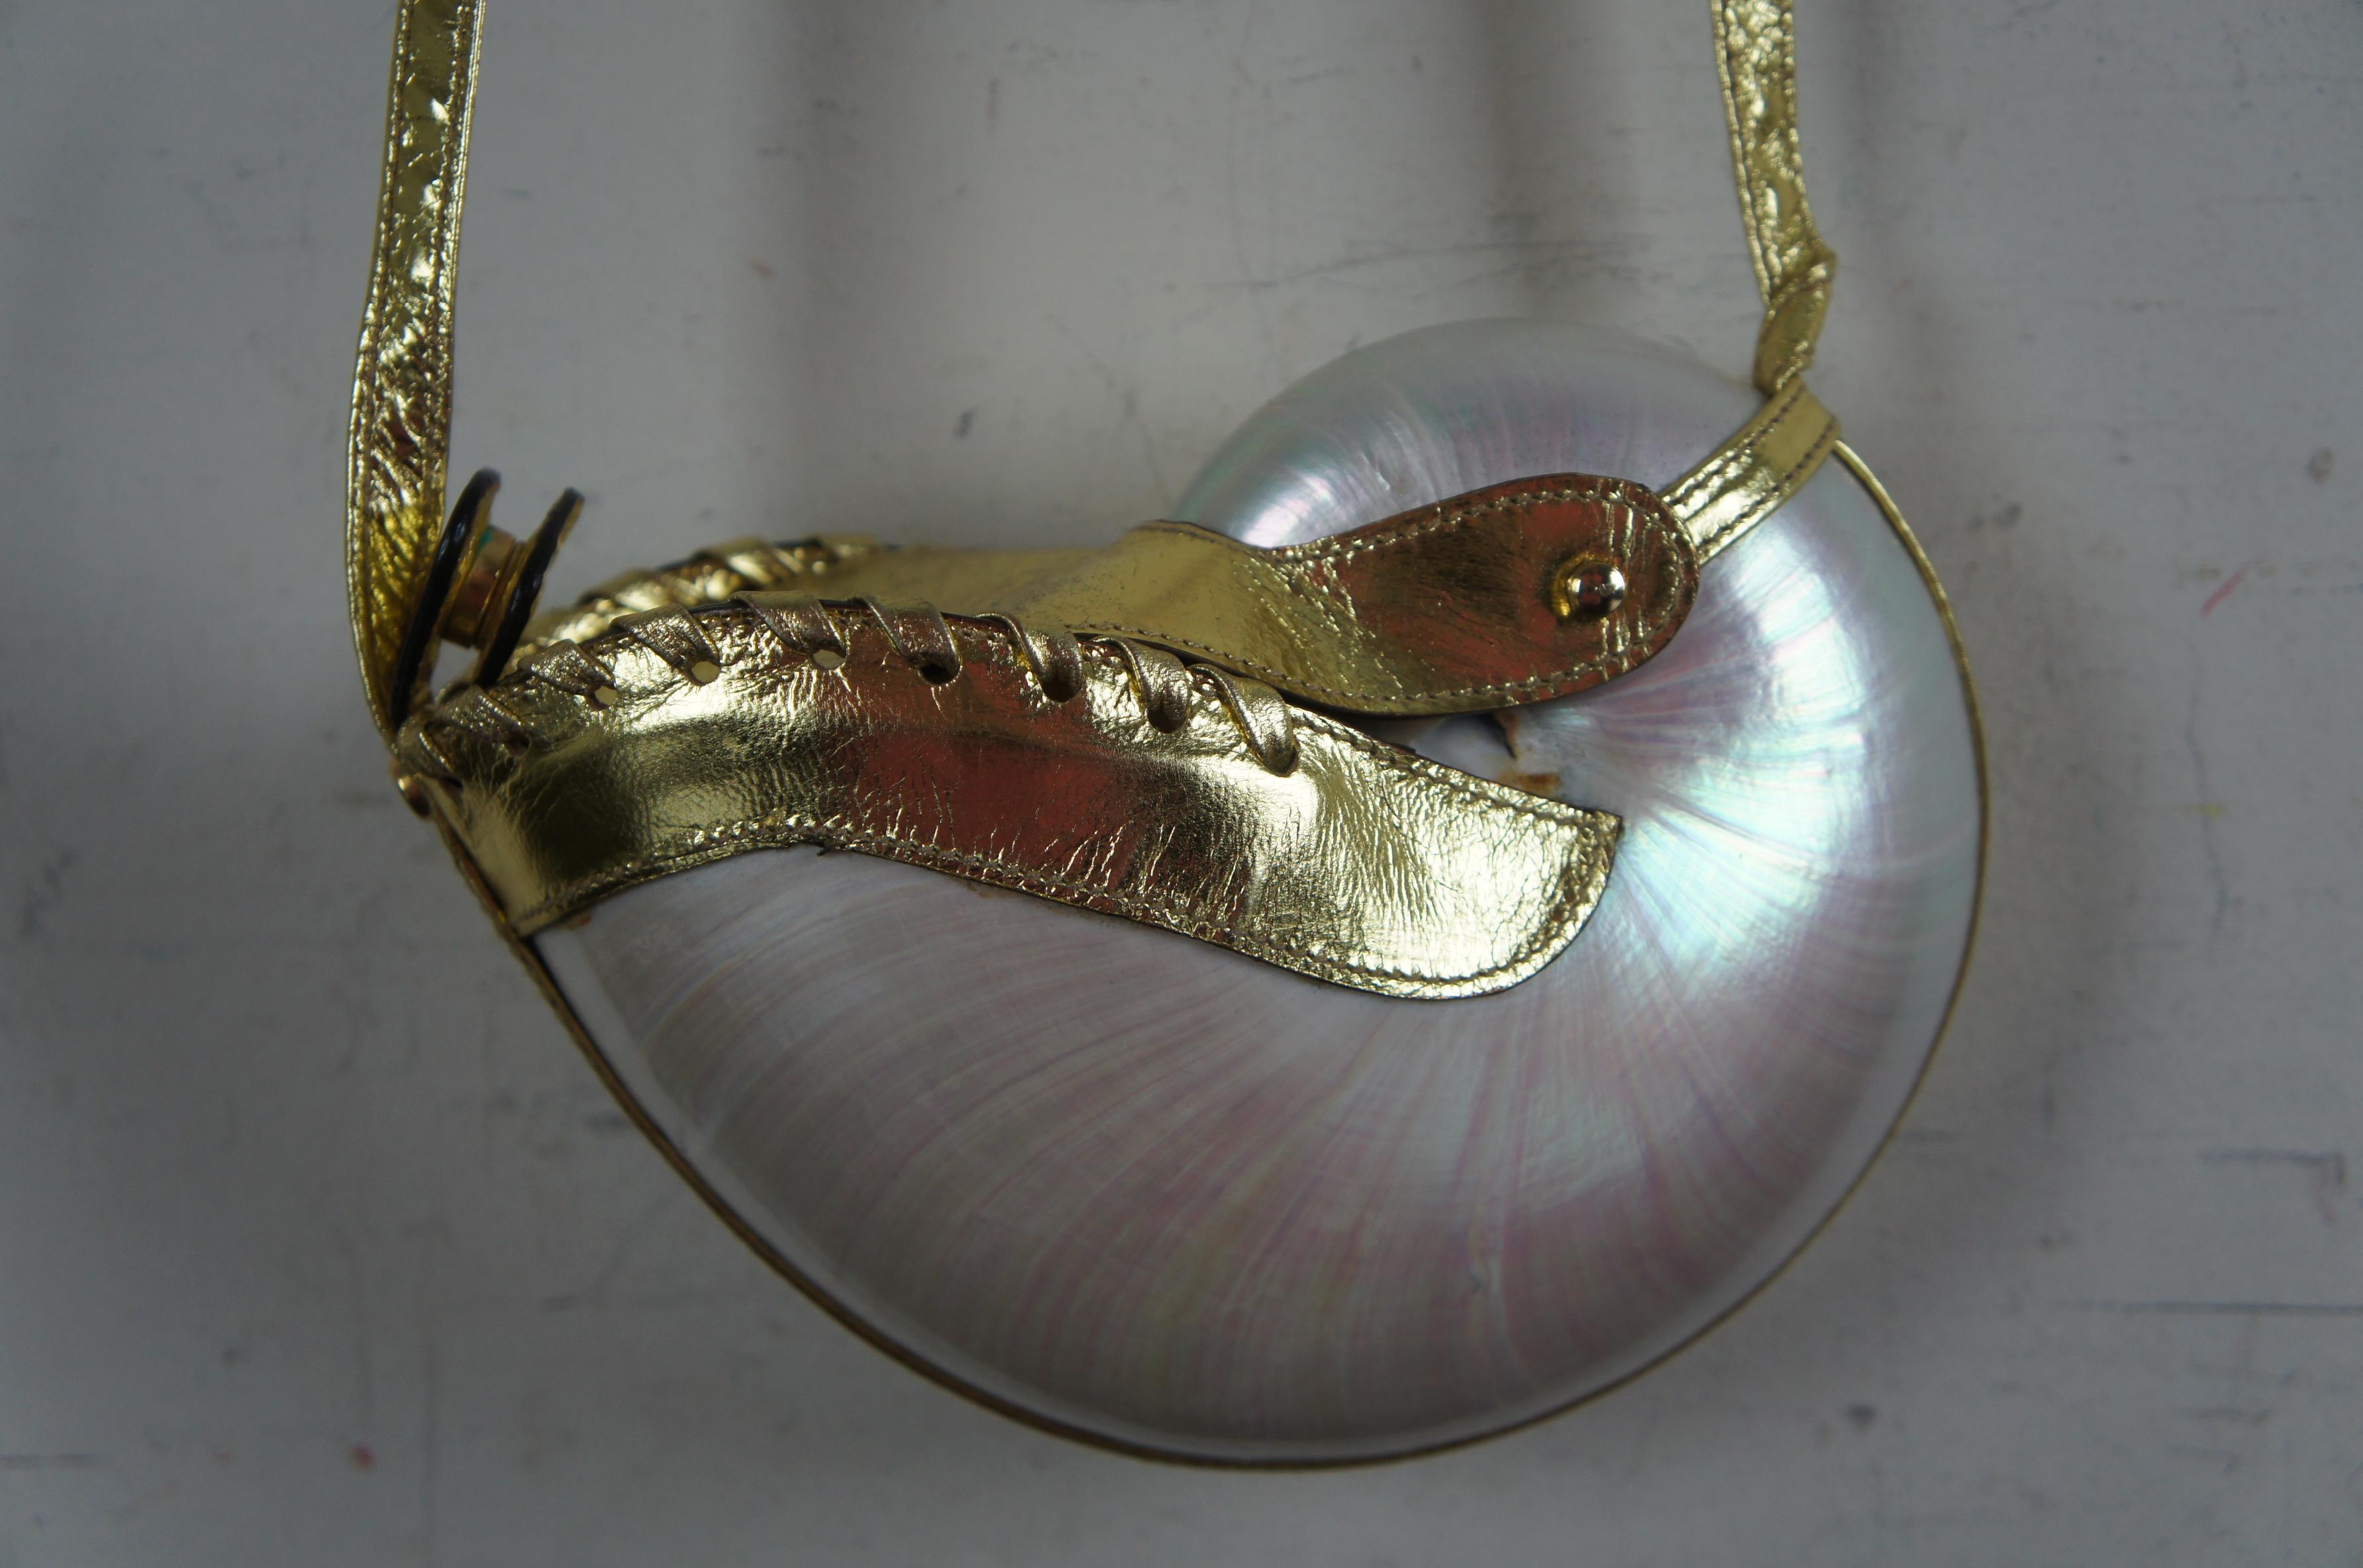 Mother of pearl nautilus purse with gold leather strap and closure, circa 1970s.

Measures: 7